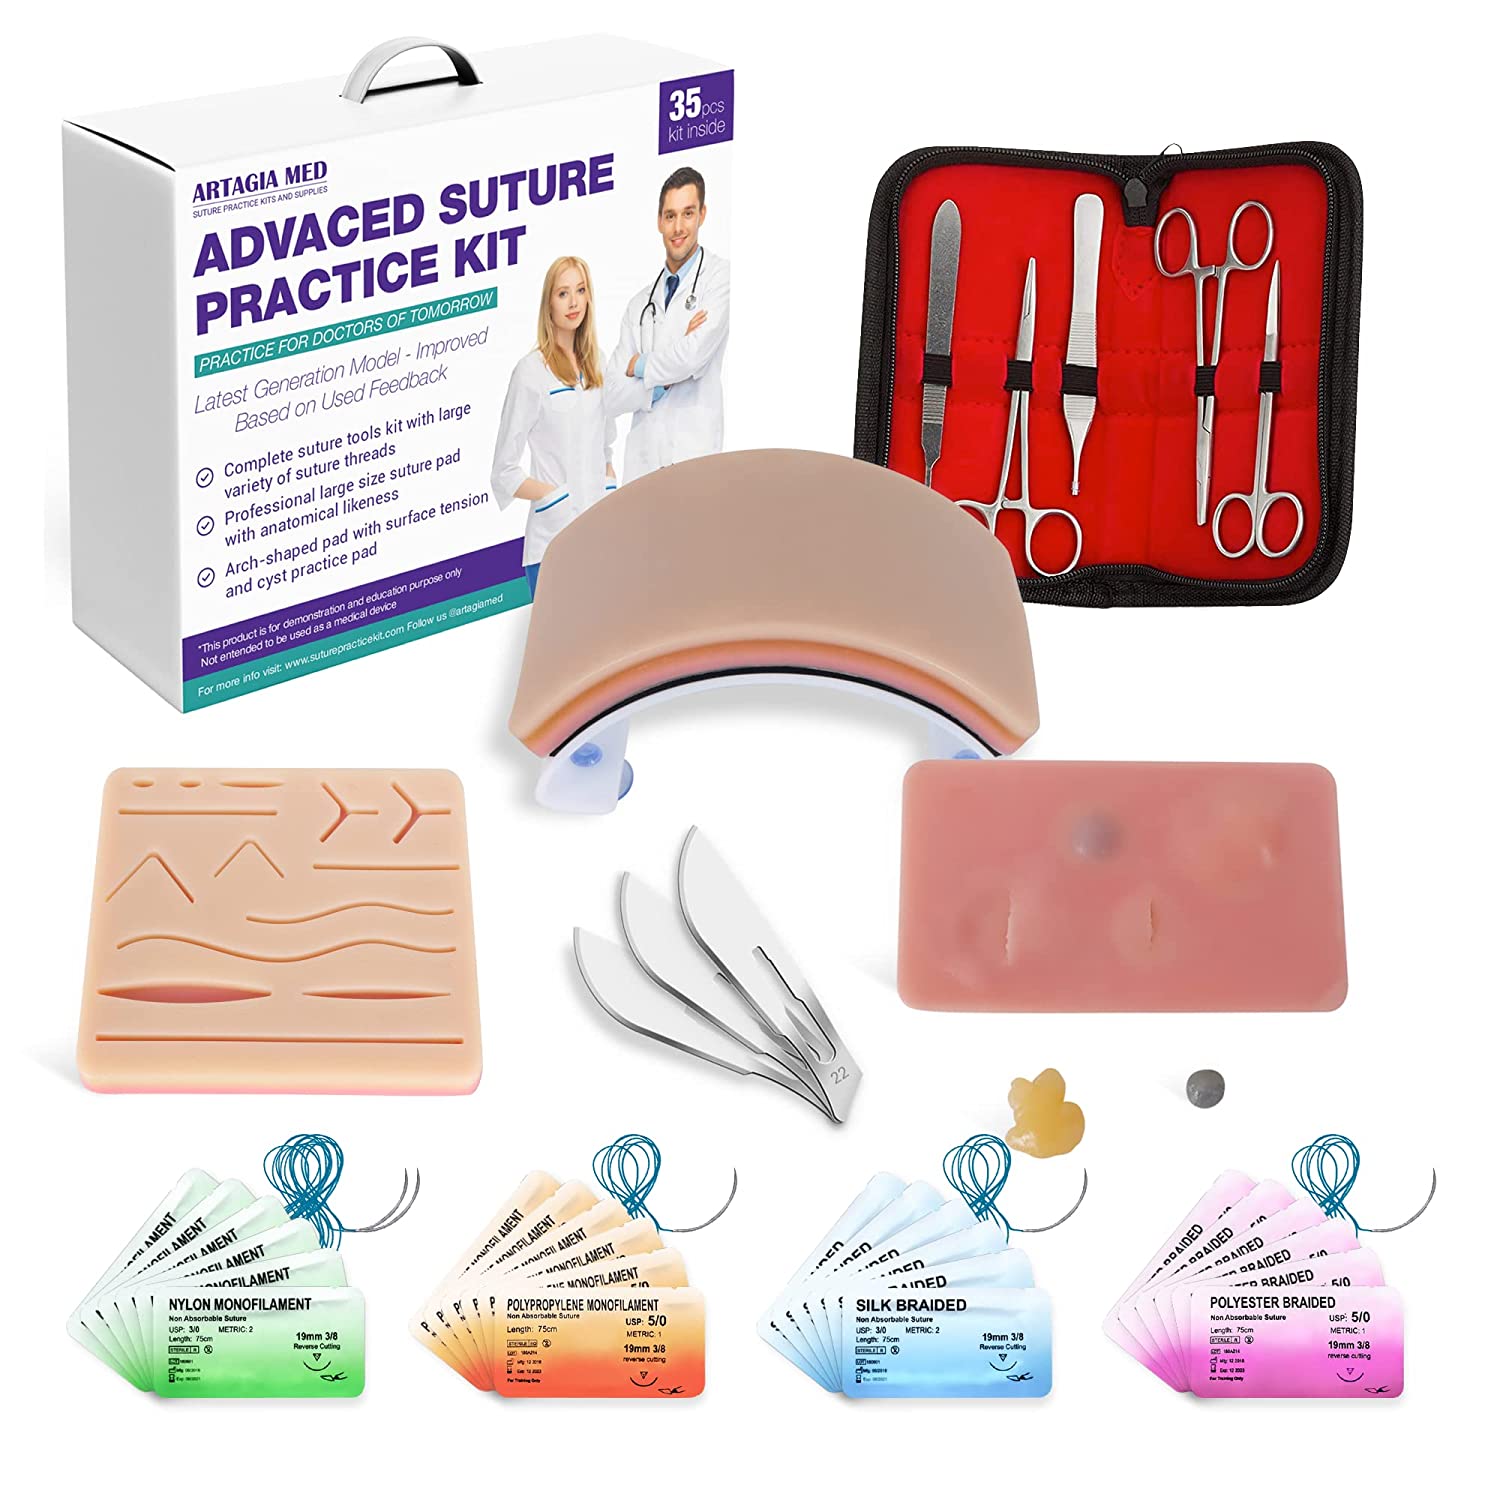 Medarchitect Suture Practice Complete Kit (30 Pieces) for Medical Student Suture Training, Include Upgrade Suture Pad with 14 Pre-Cut Wounds, Suture